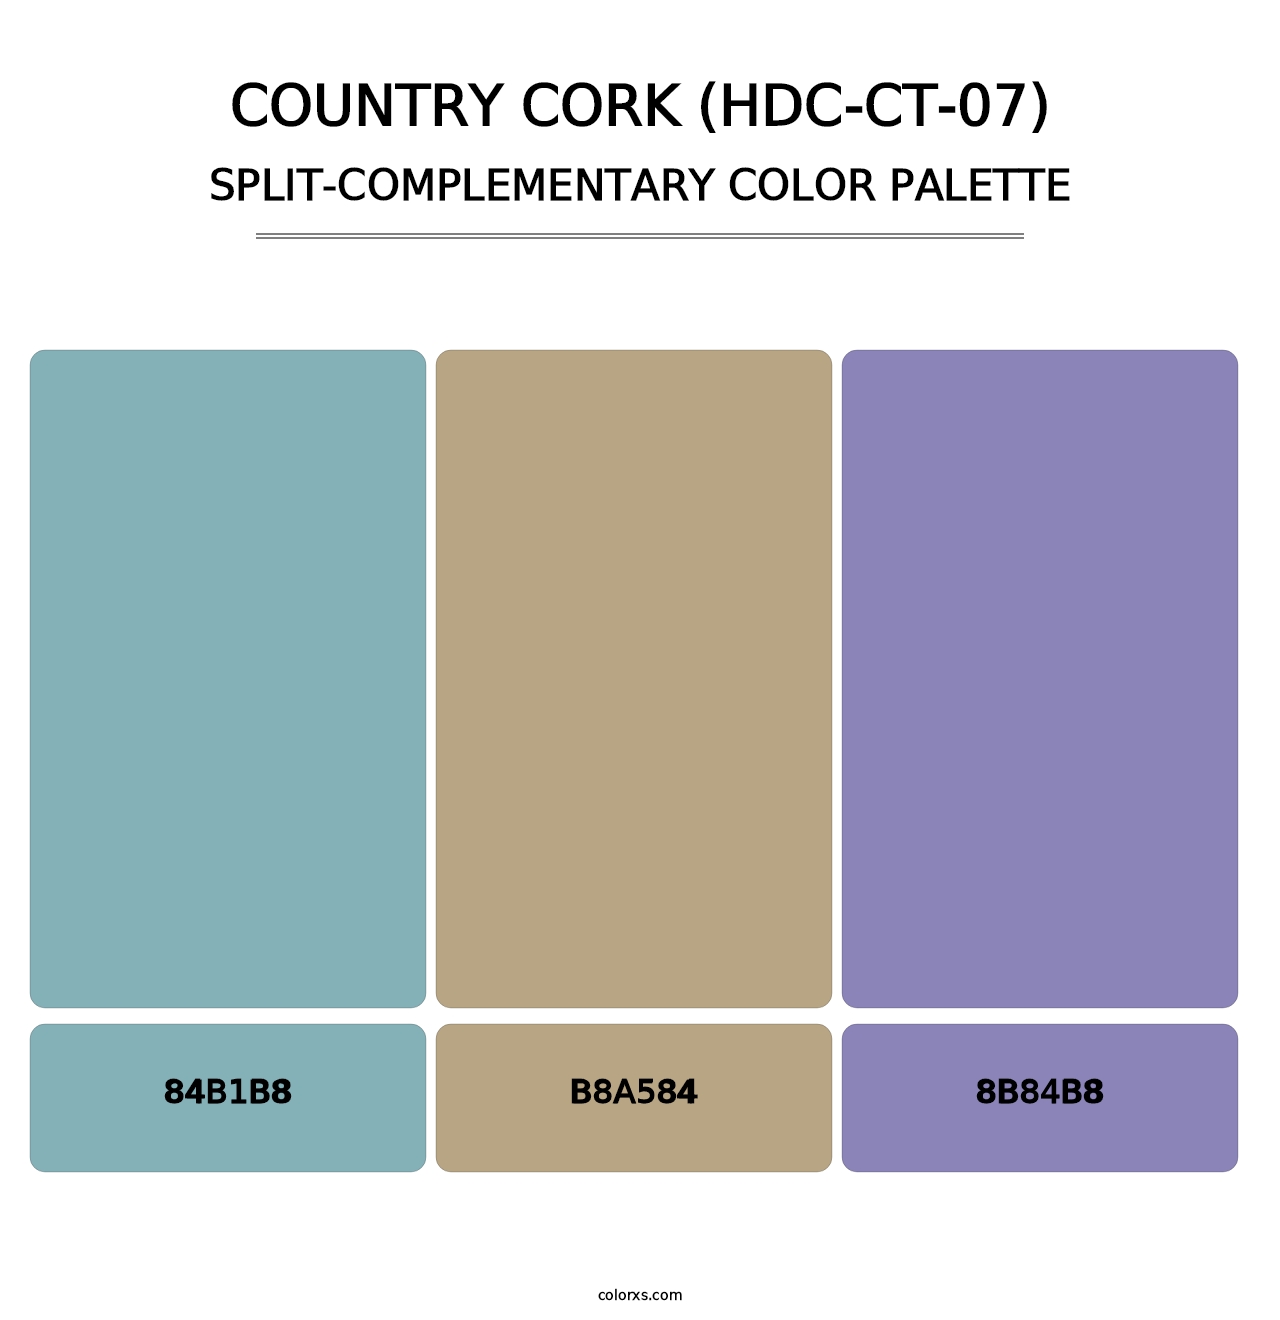 Country Cork (HDC-CT-07) - Split-Complementary Color Palette